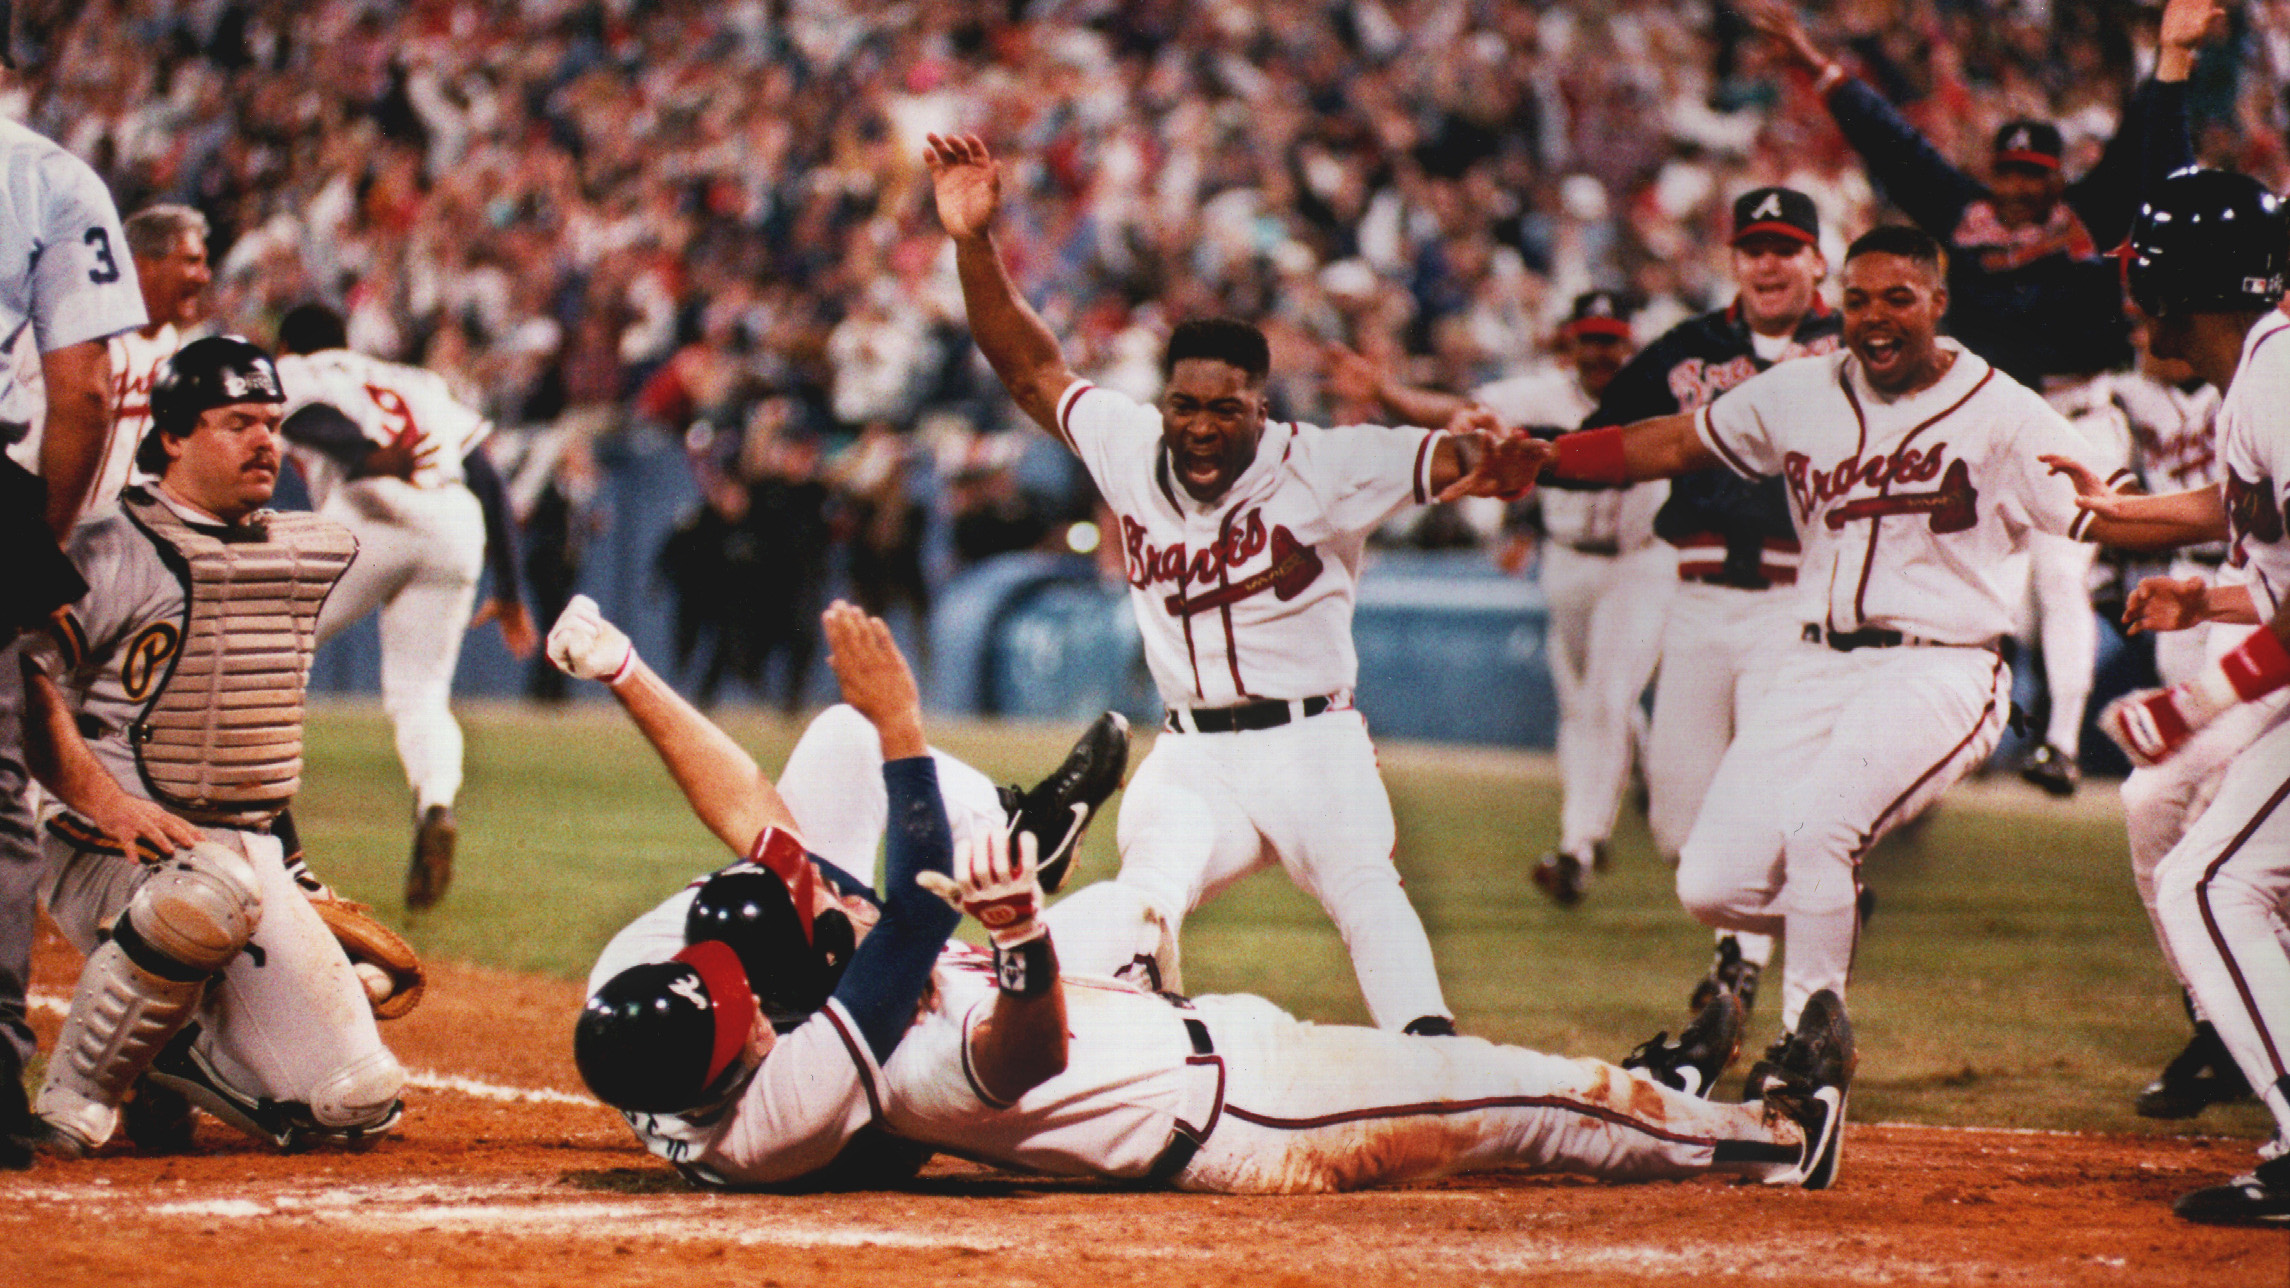 Sid Bream Signed Braves 8x10 Photo Inscribed The Slide & 10/14